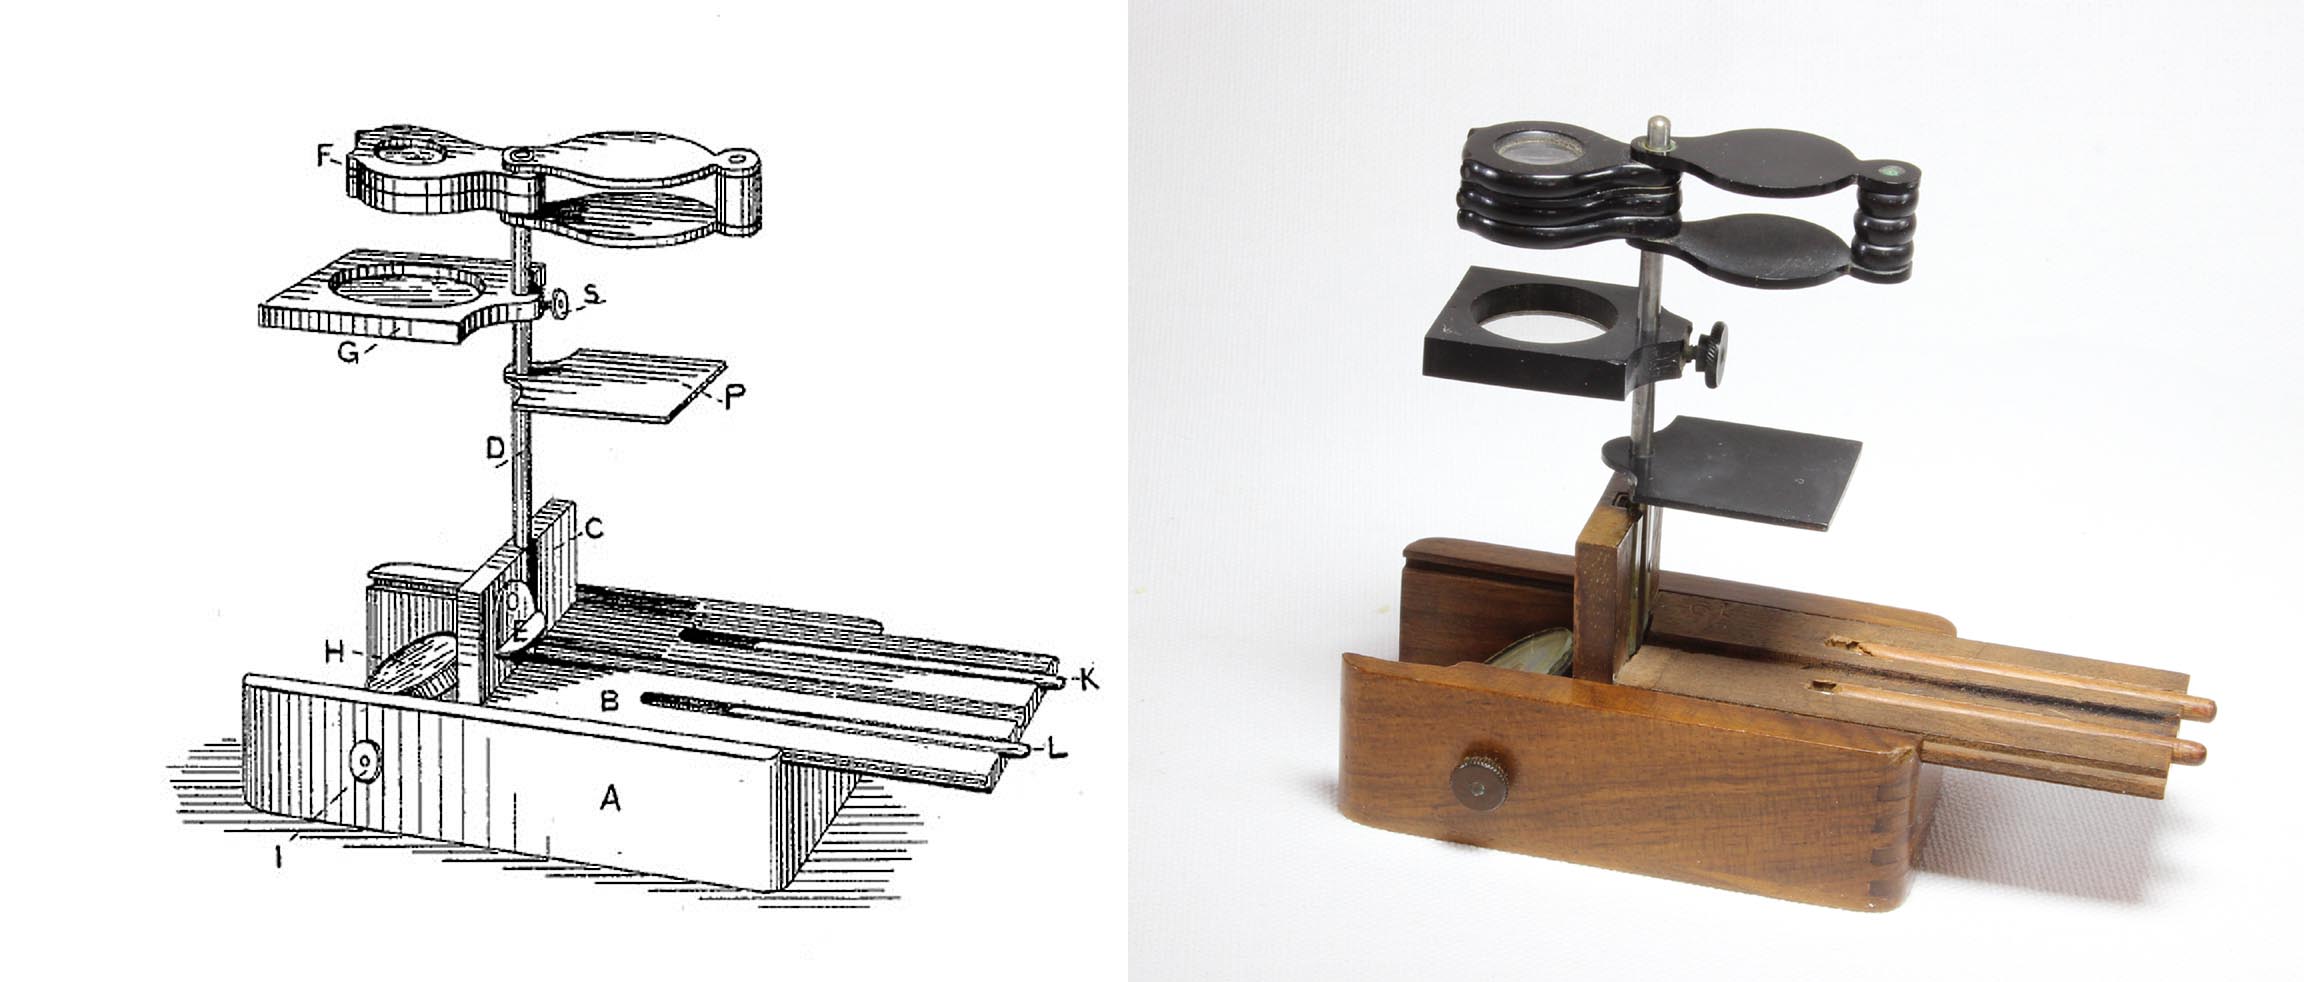 Excelsior microscope